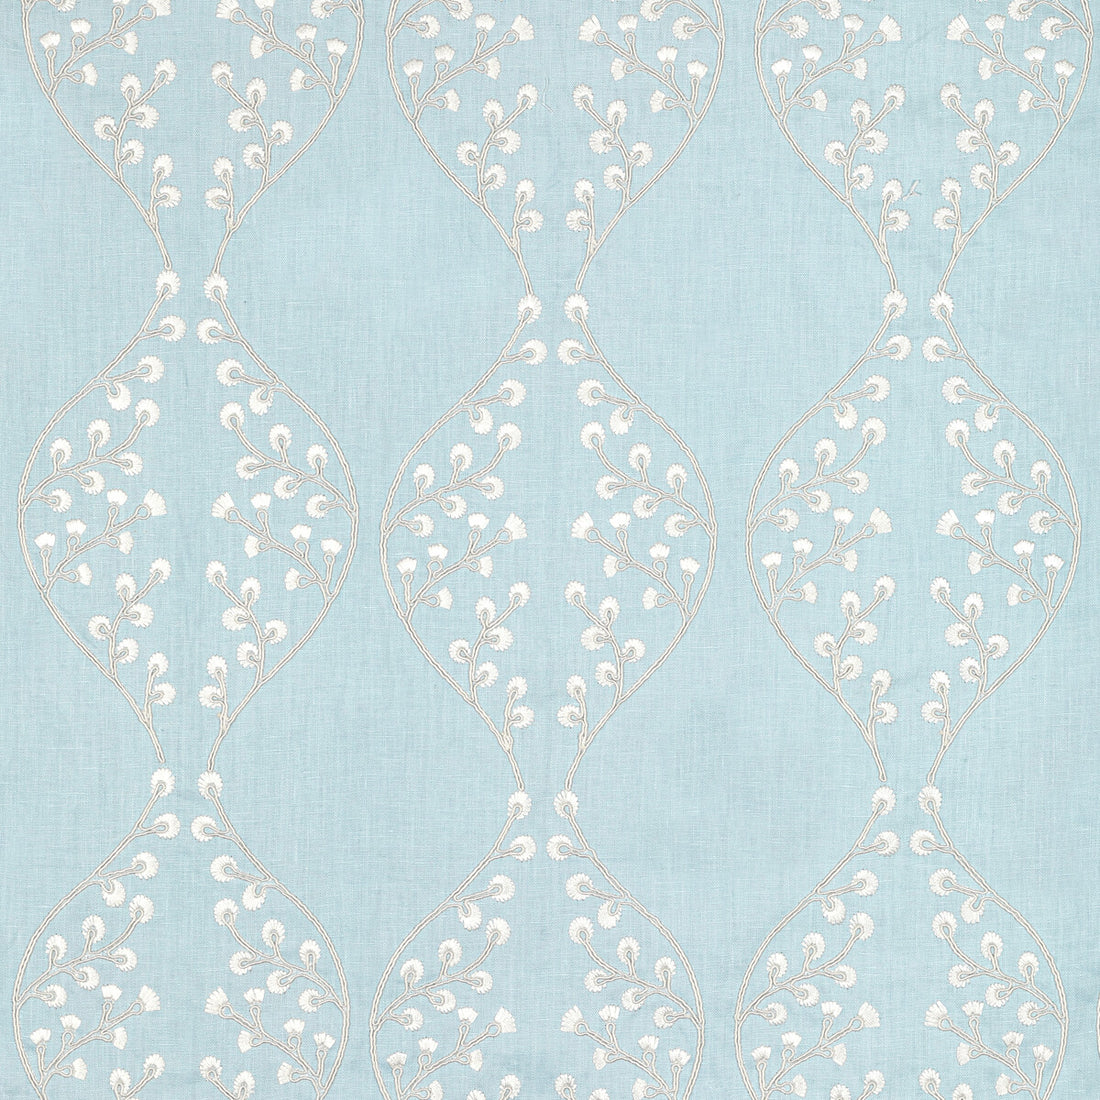 Lillie Embroidery fabric in sky color - pattern 2021129.15.0 - by Lee Jofa in the Summerland collection